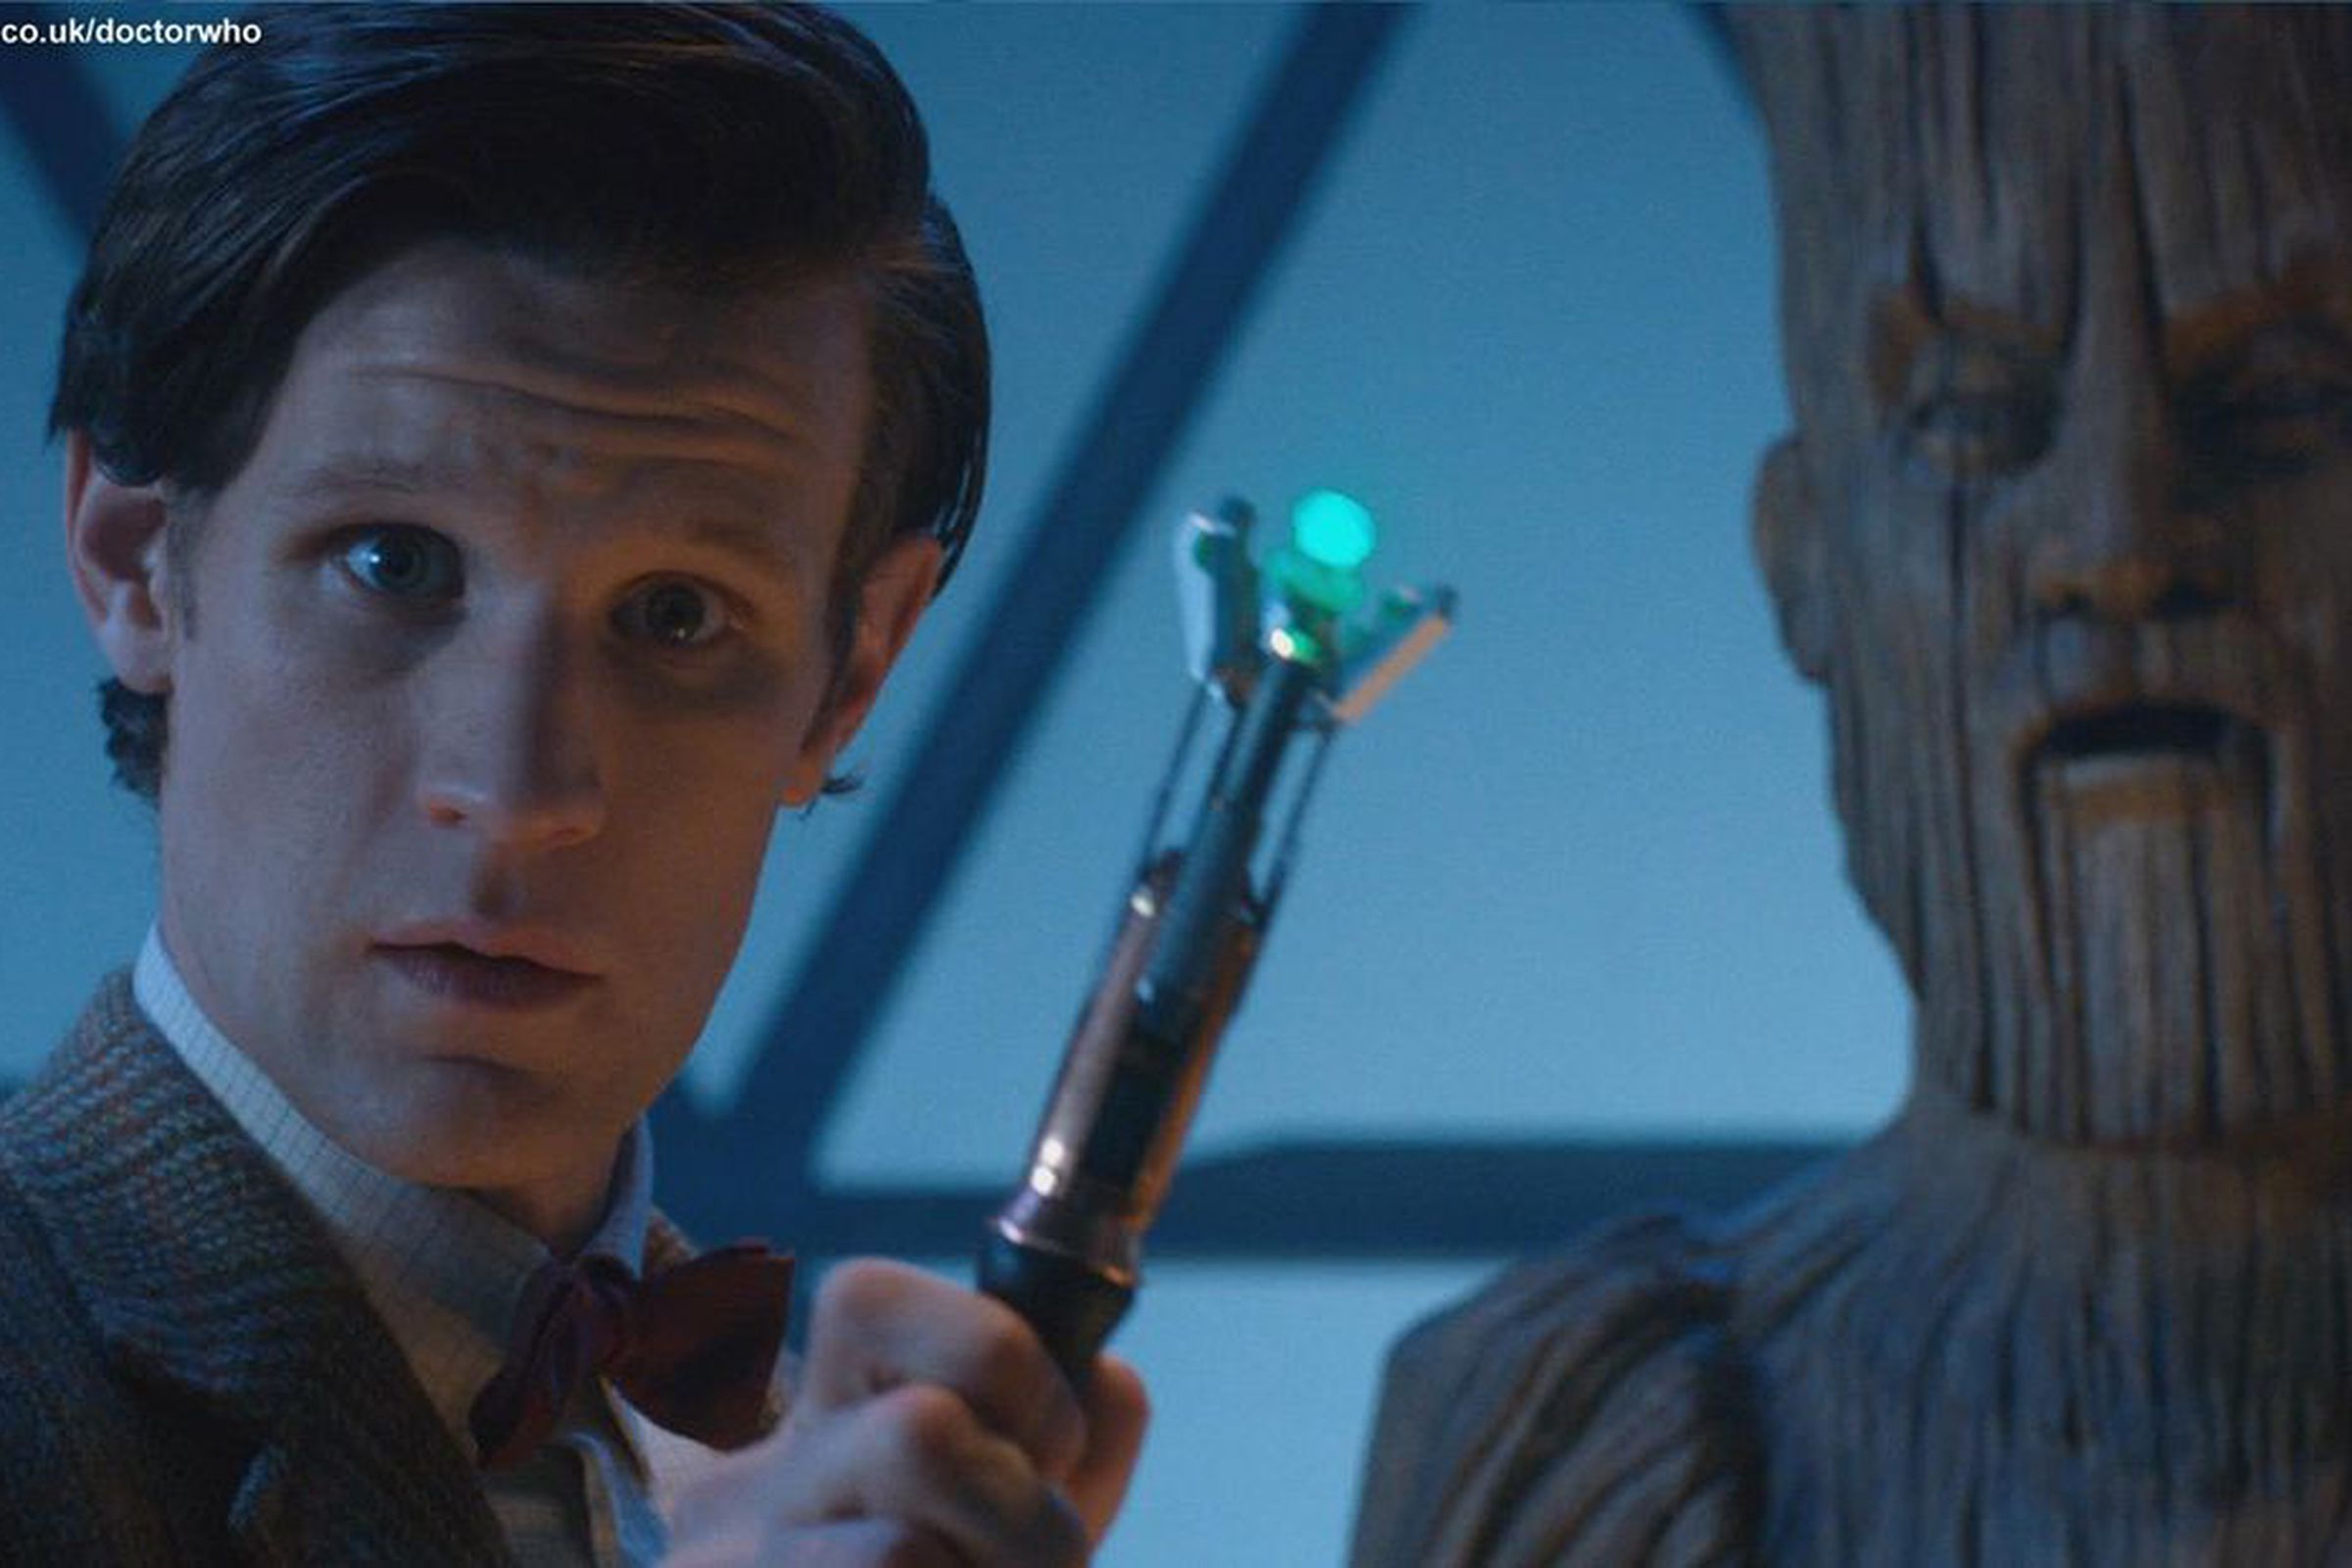 Dr. Who sonic screwdriver